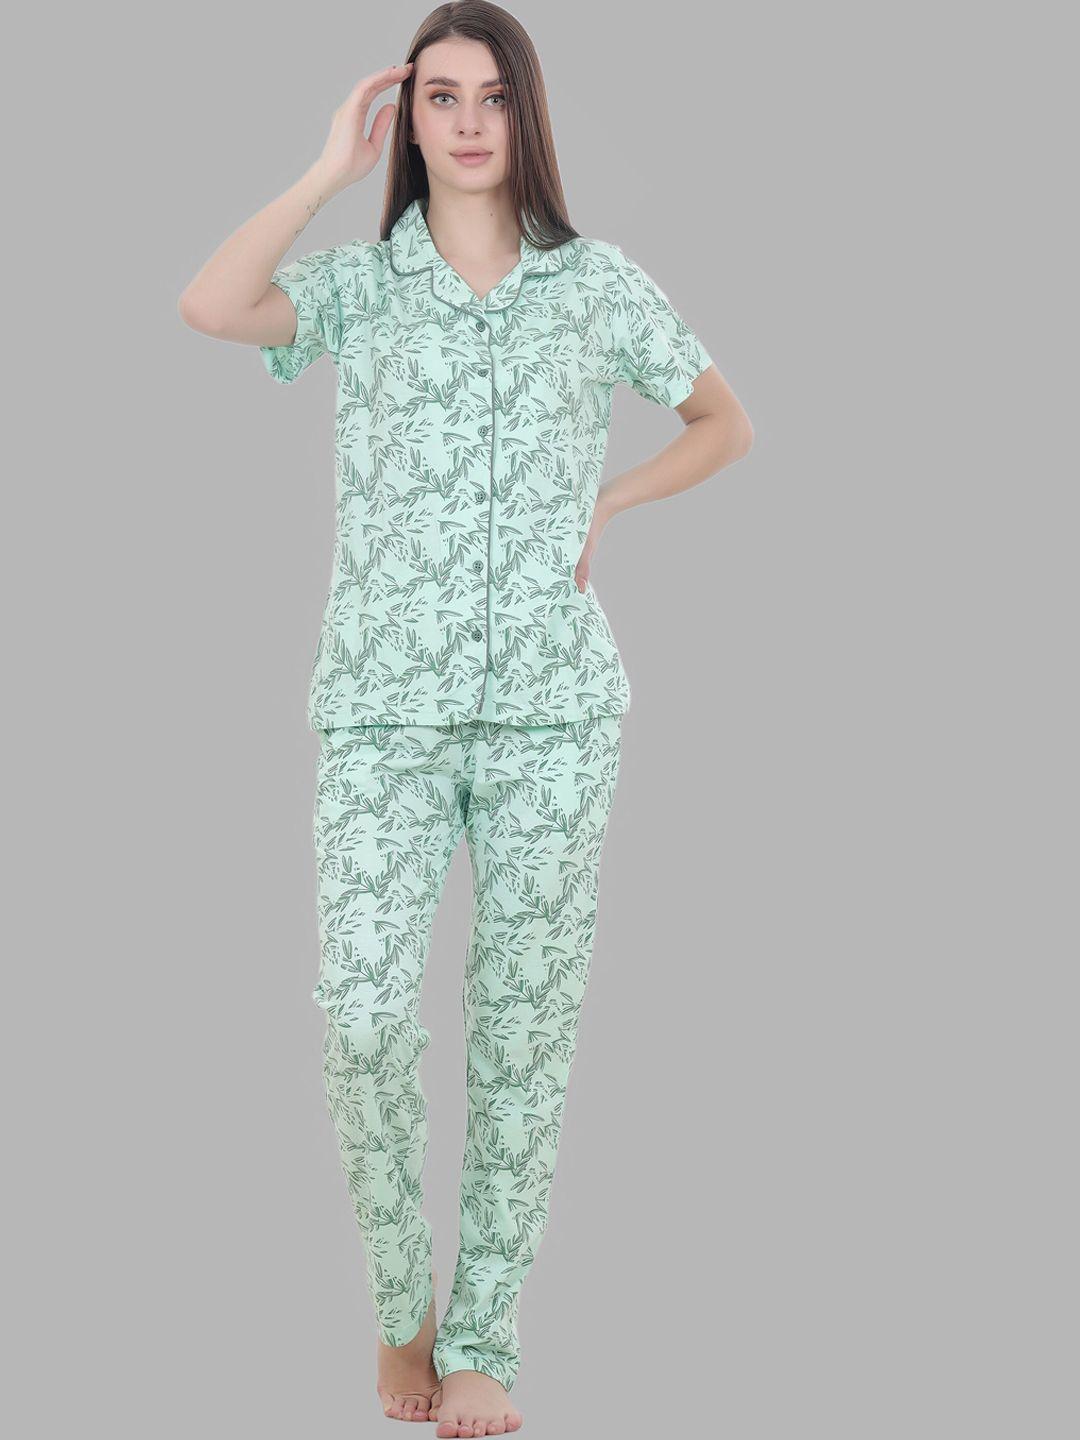 flosberry floral print night suit